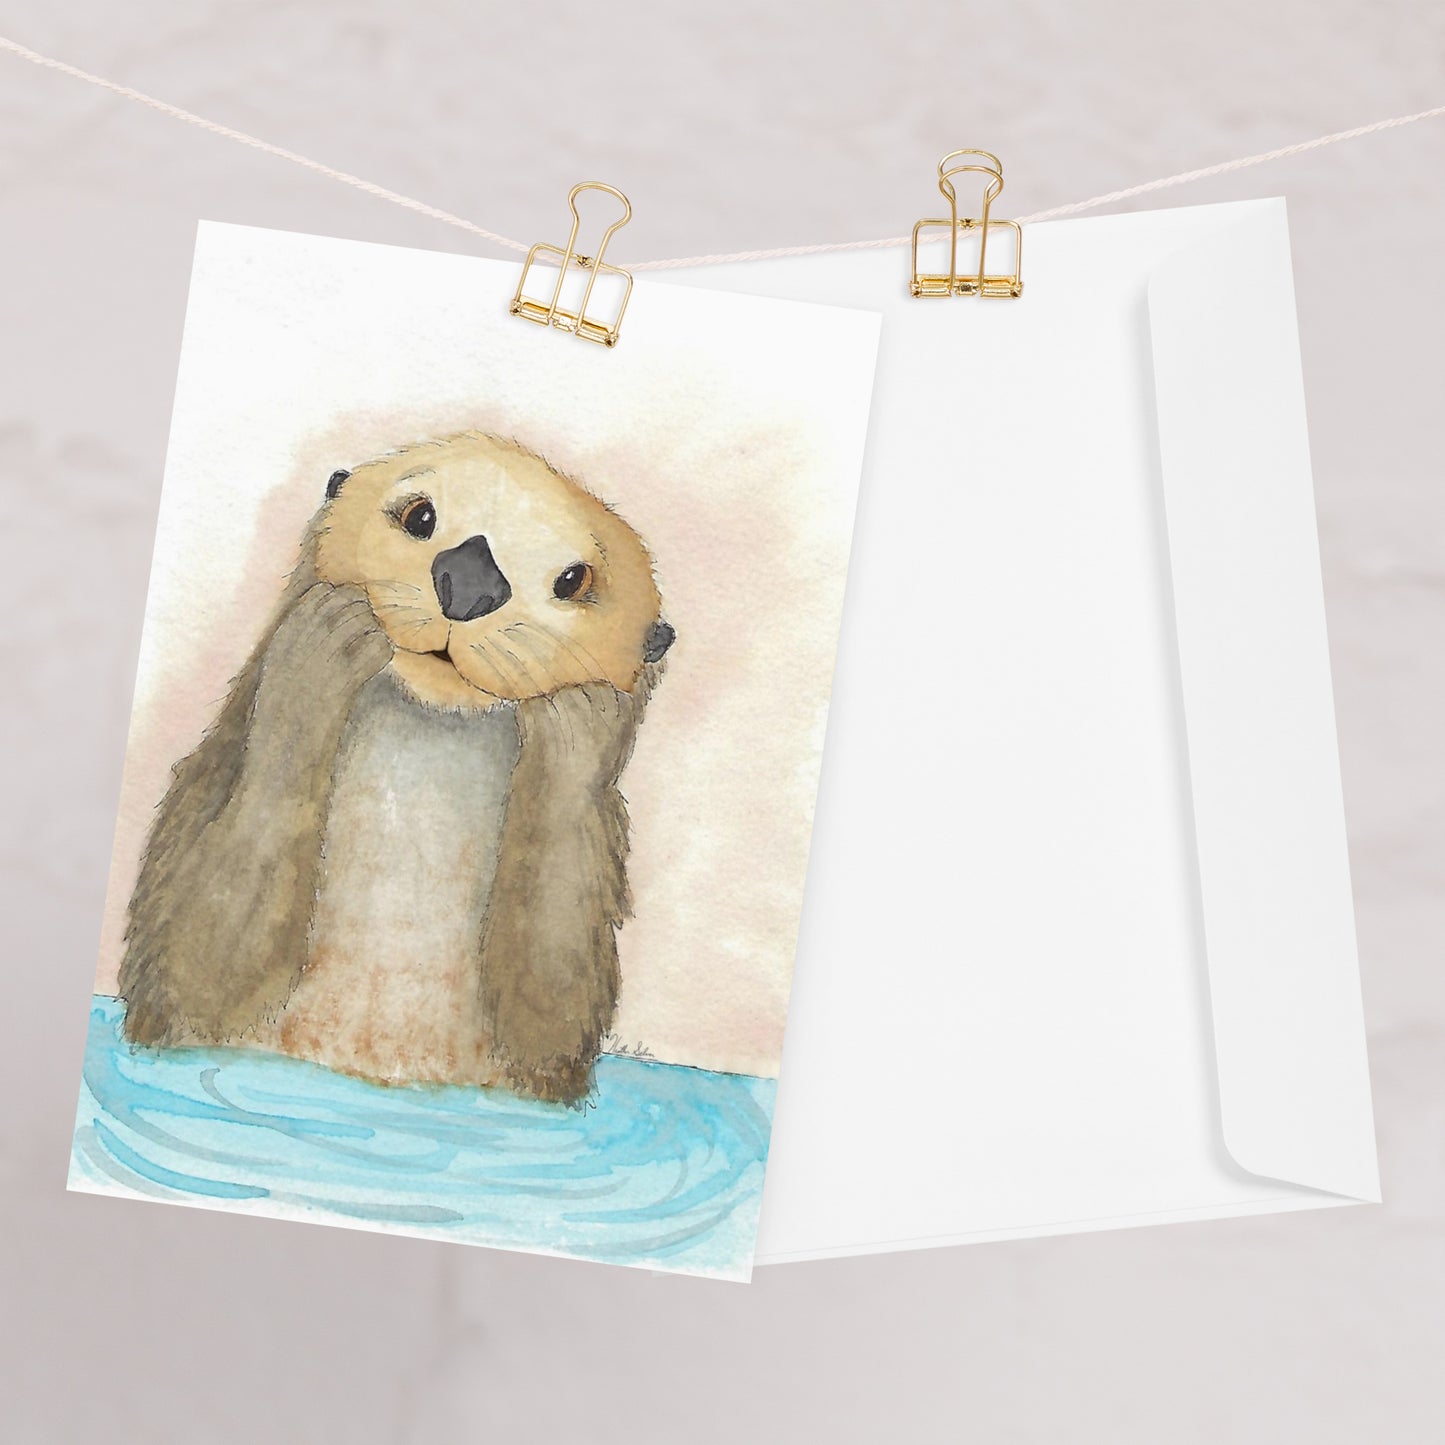 Pack of ten 5 x 7 inch greeting cards. Features watercolor print of a playful sea otter on the front. Inside is blank. Made of coated paperboard. Comes with ten envelopes. One card shown on clothesline with a white envelope.